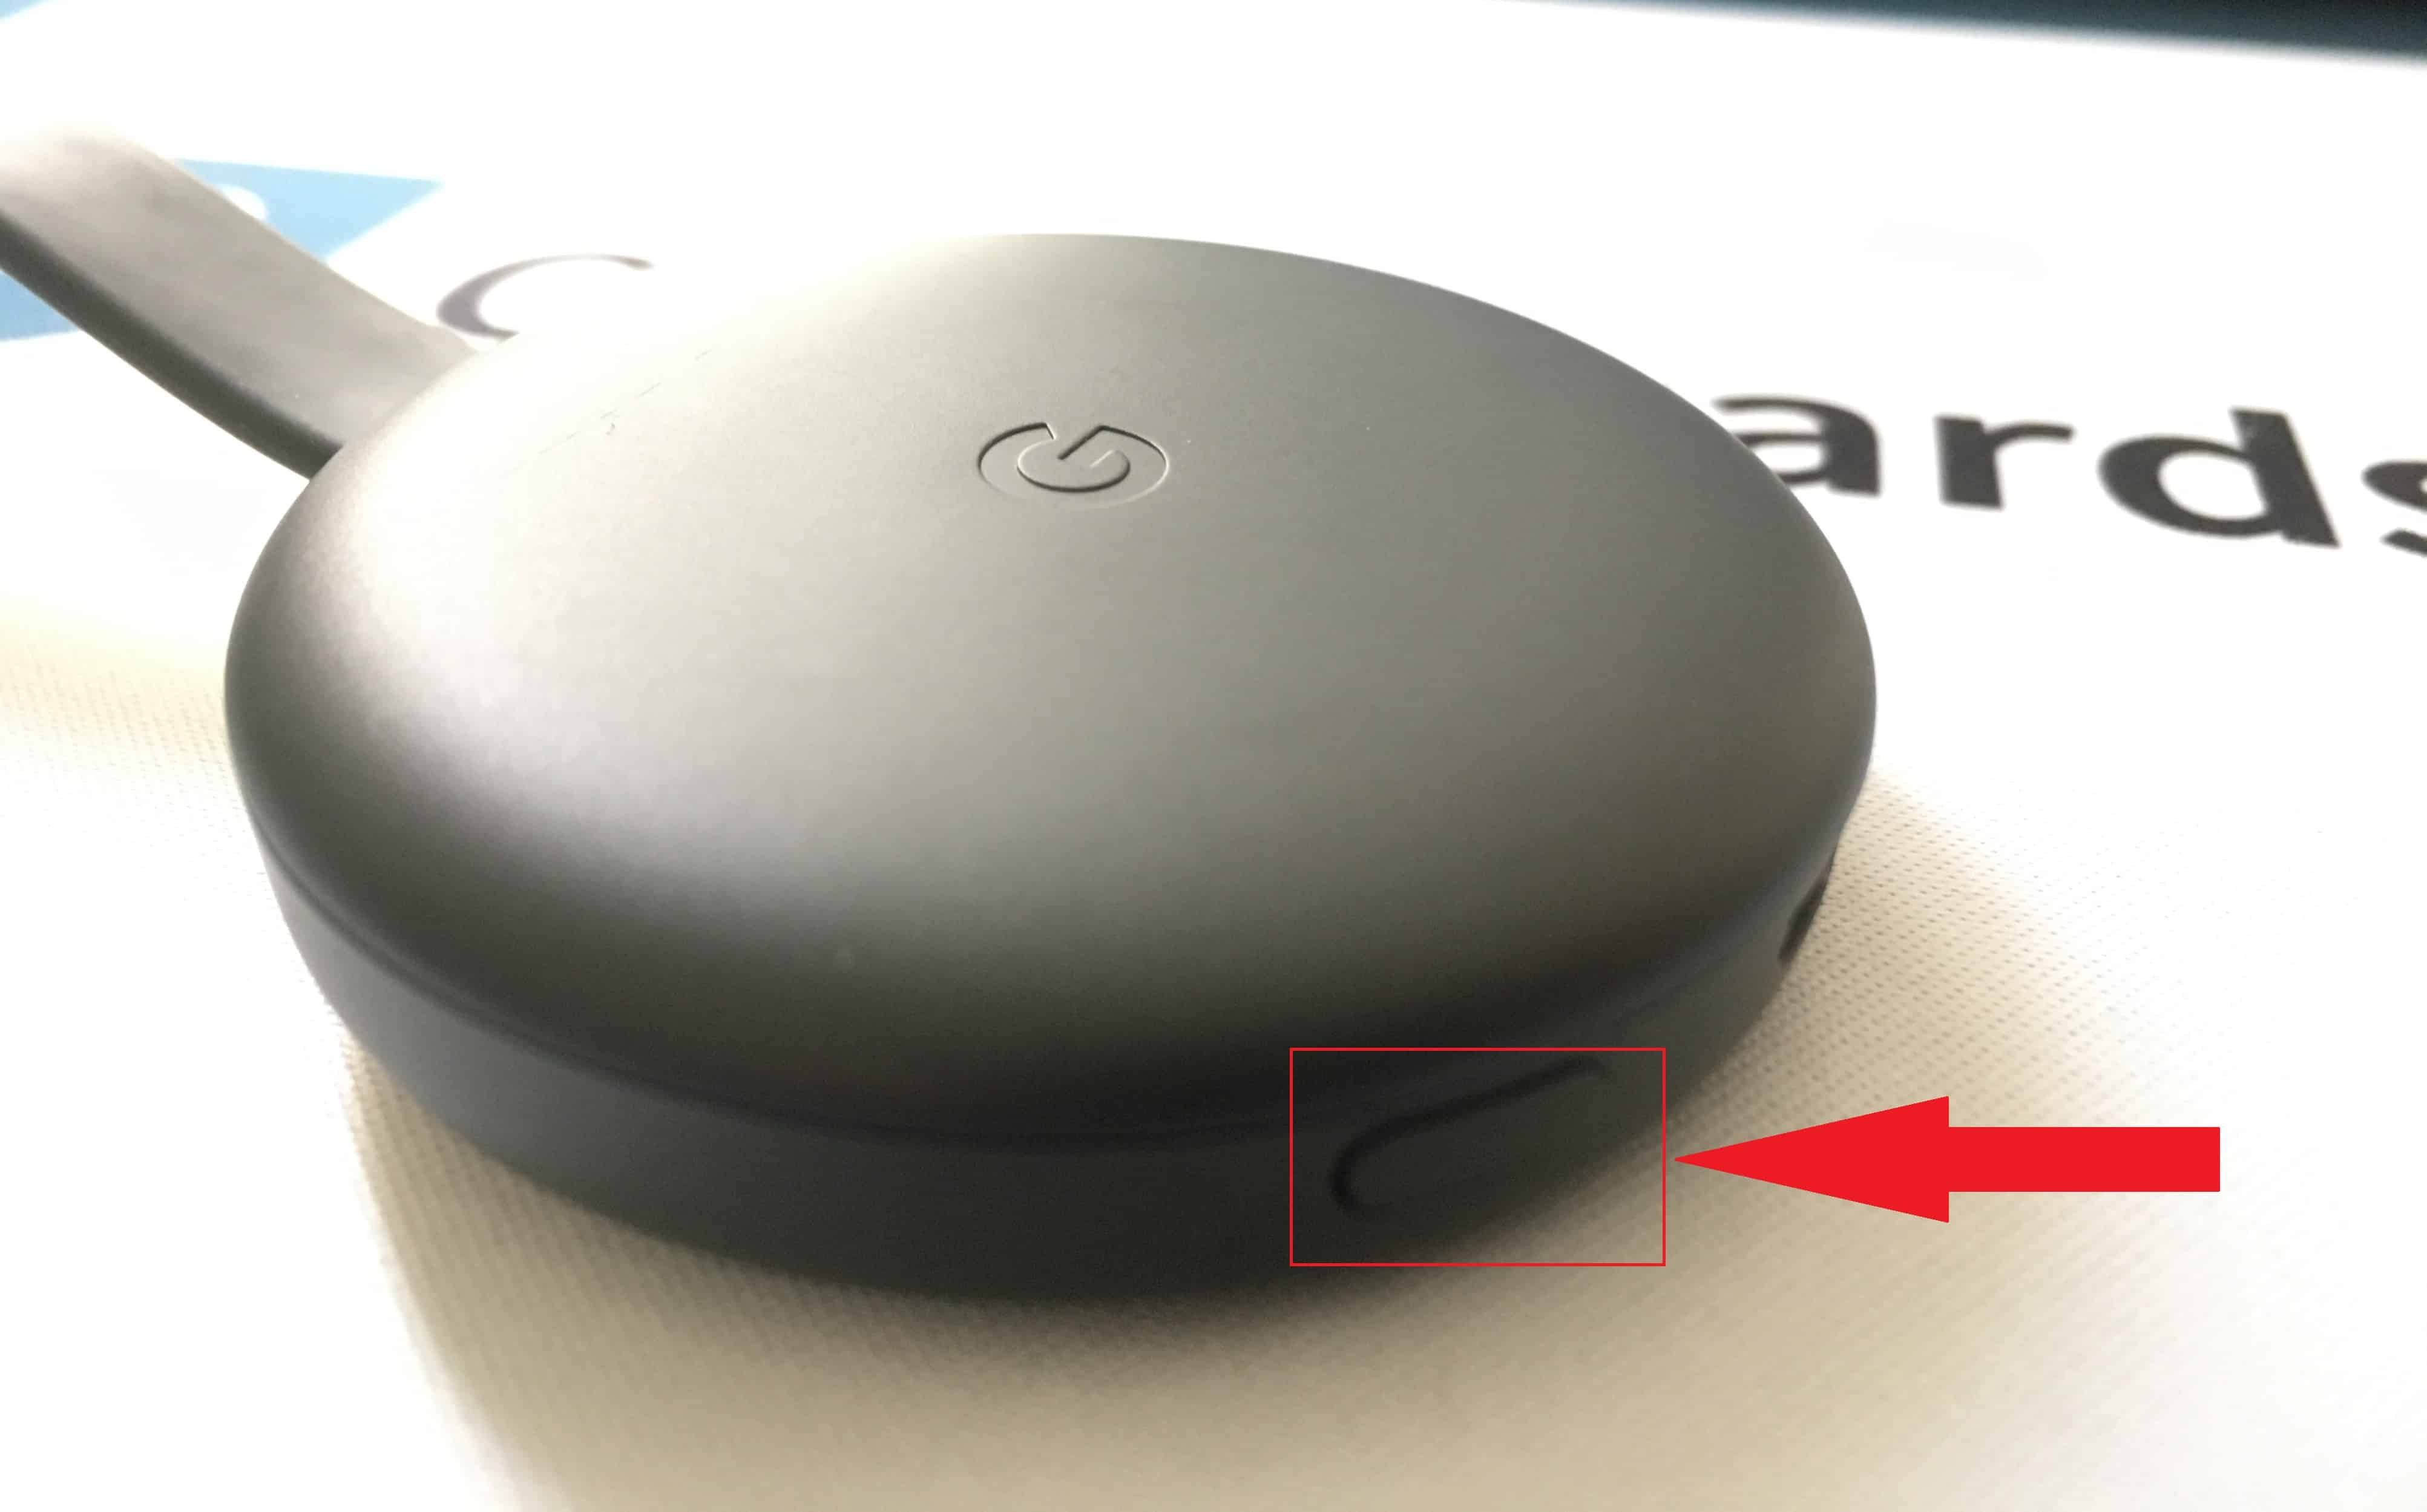 New Chromecast HD has an Unlockable Bootloader from the factory